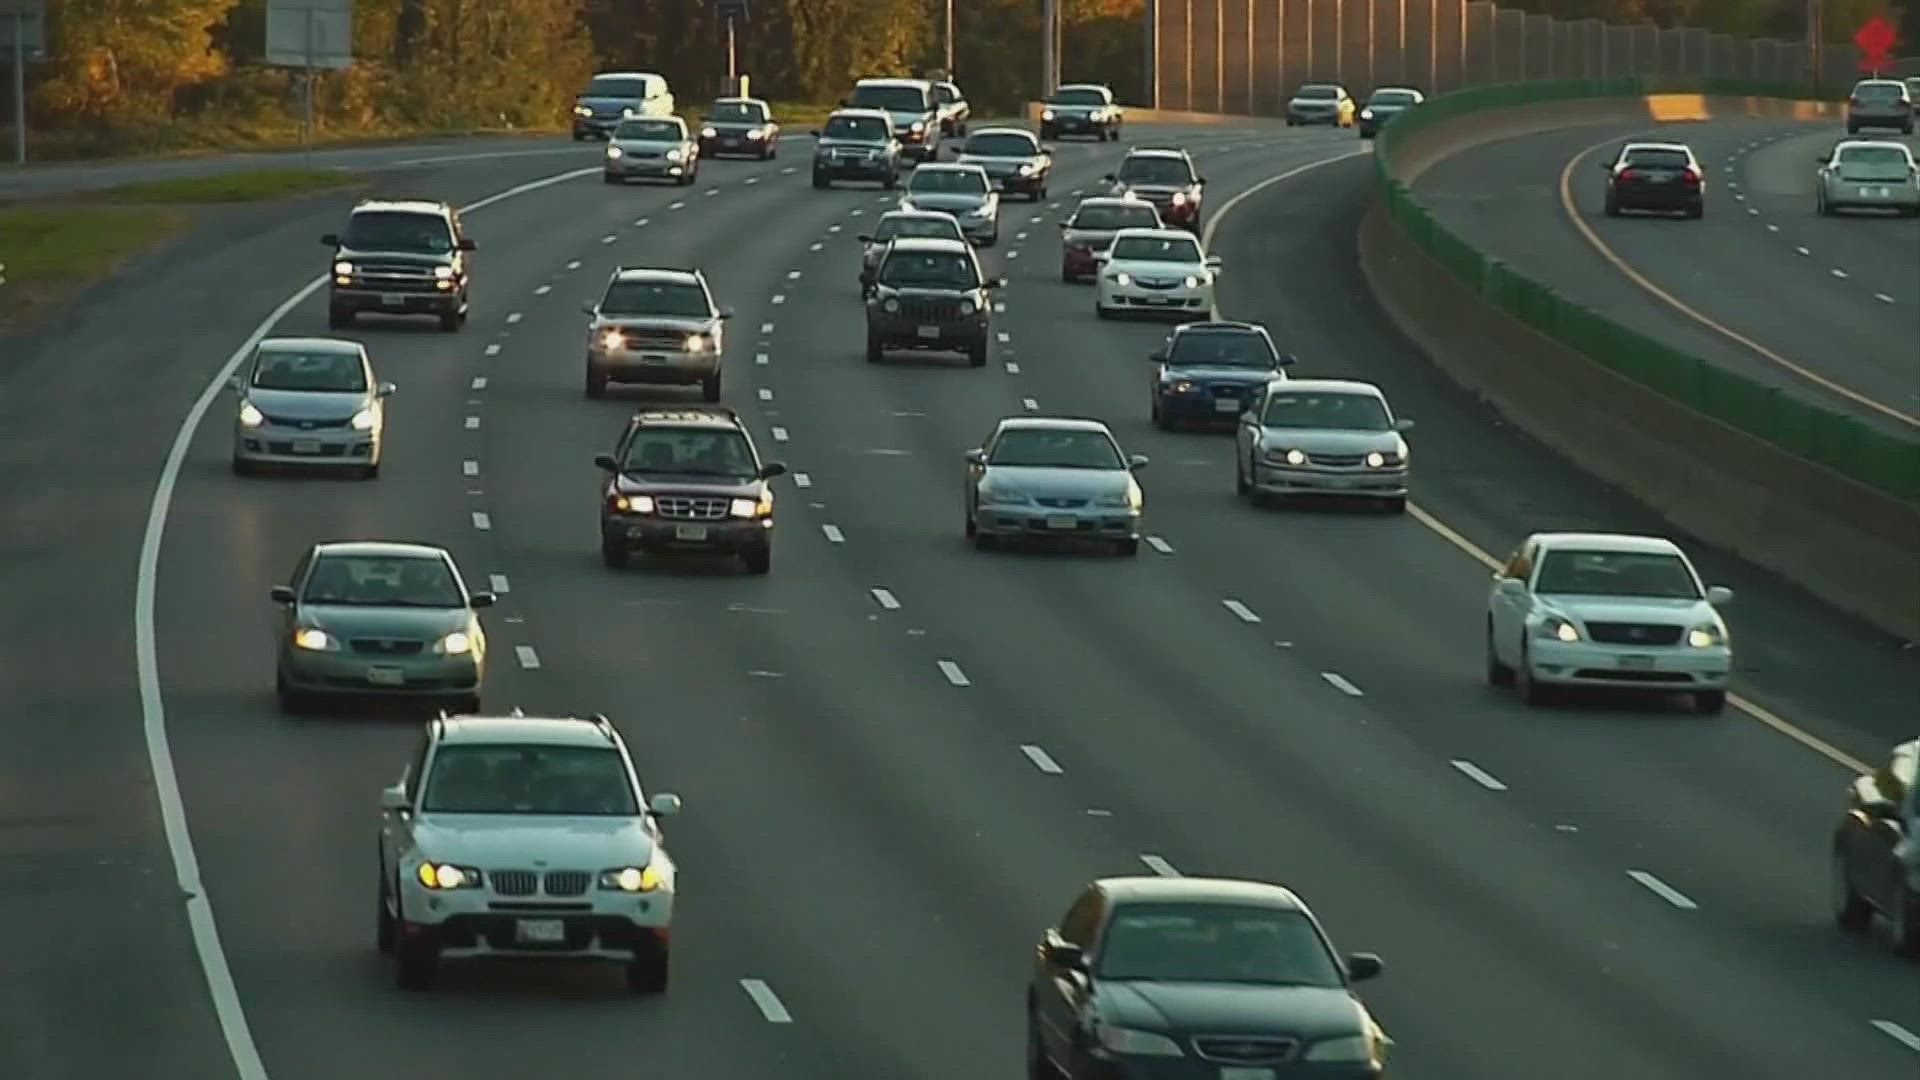 AAA estimated that 54.6 million people will travel at least 50 miles to spend Thanksgiving with loved ones this year.